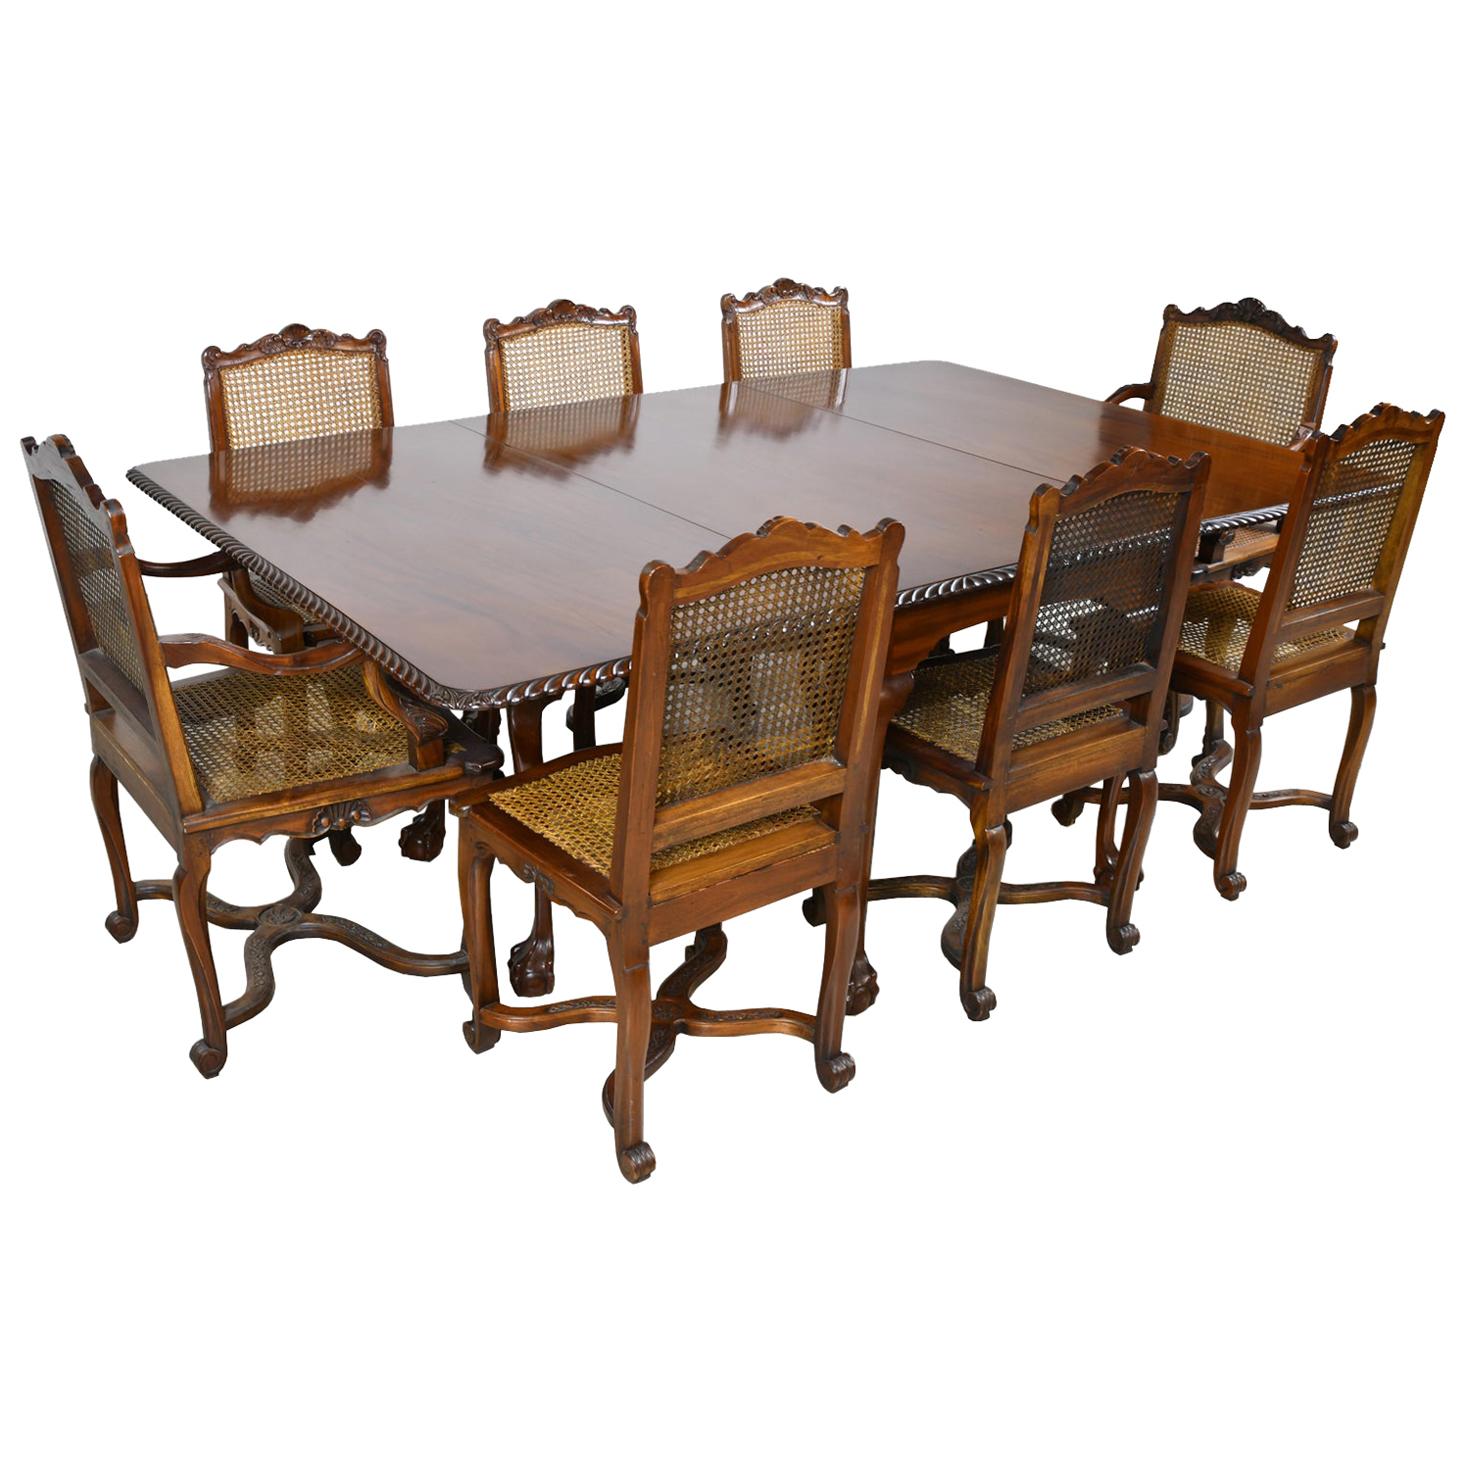 Queen Anne-Style Drop-Leaf Dining Table & Eight Louis XIV Style Chairs w/ Caning